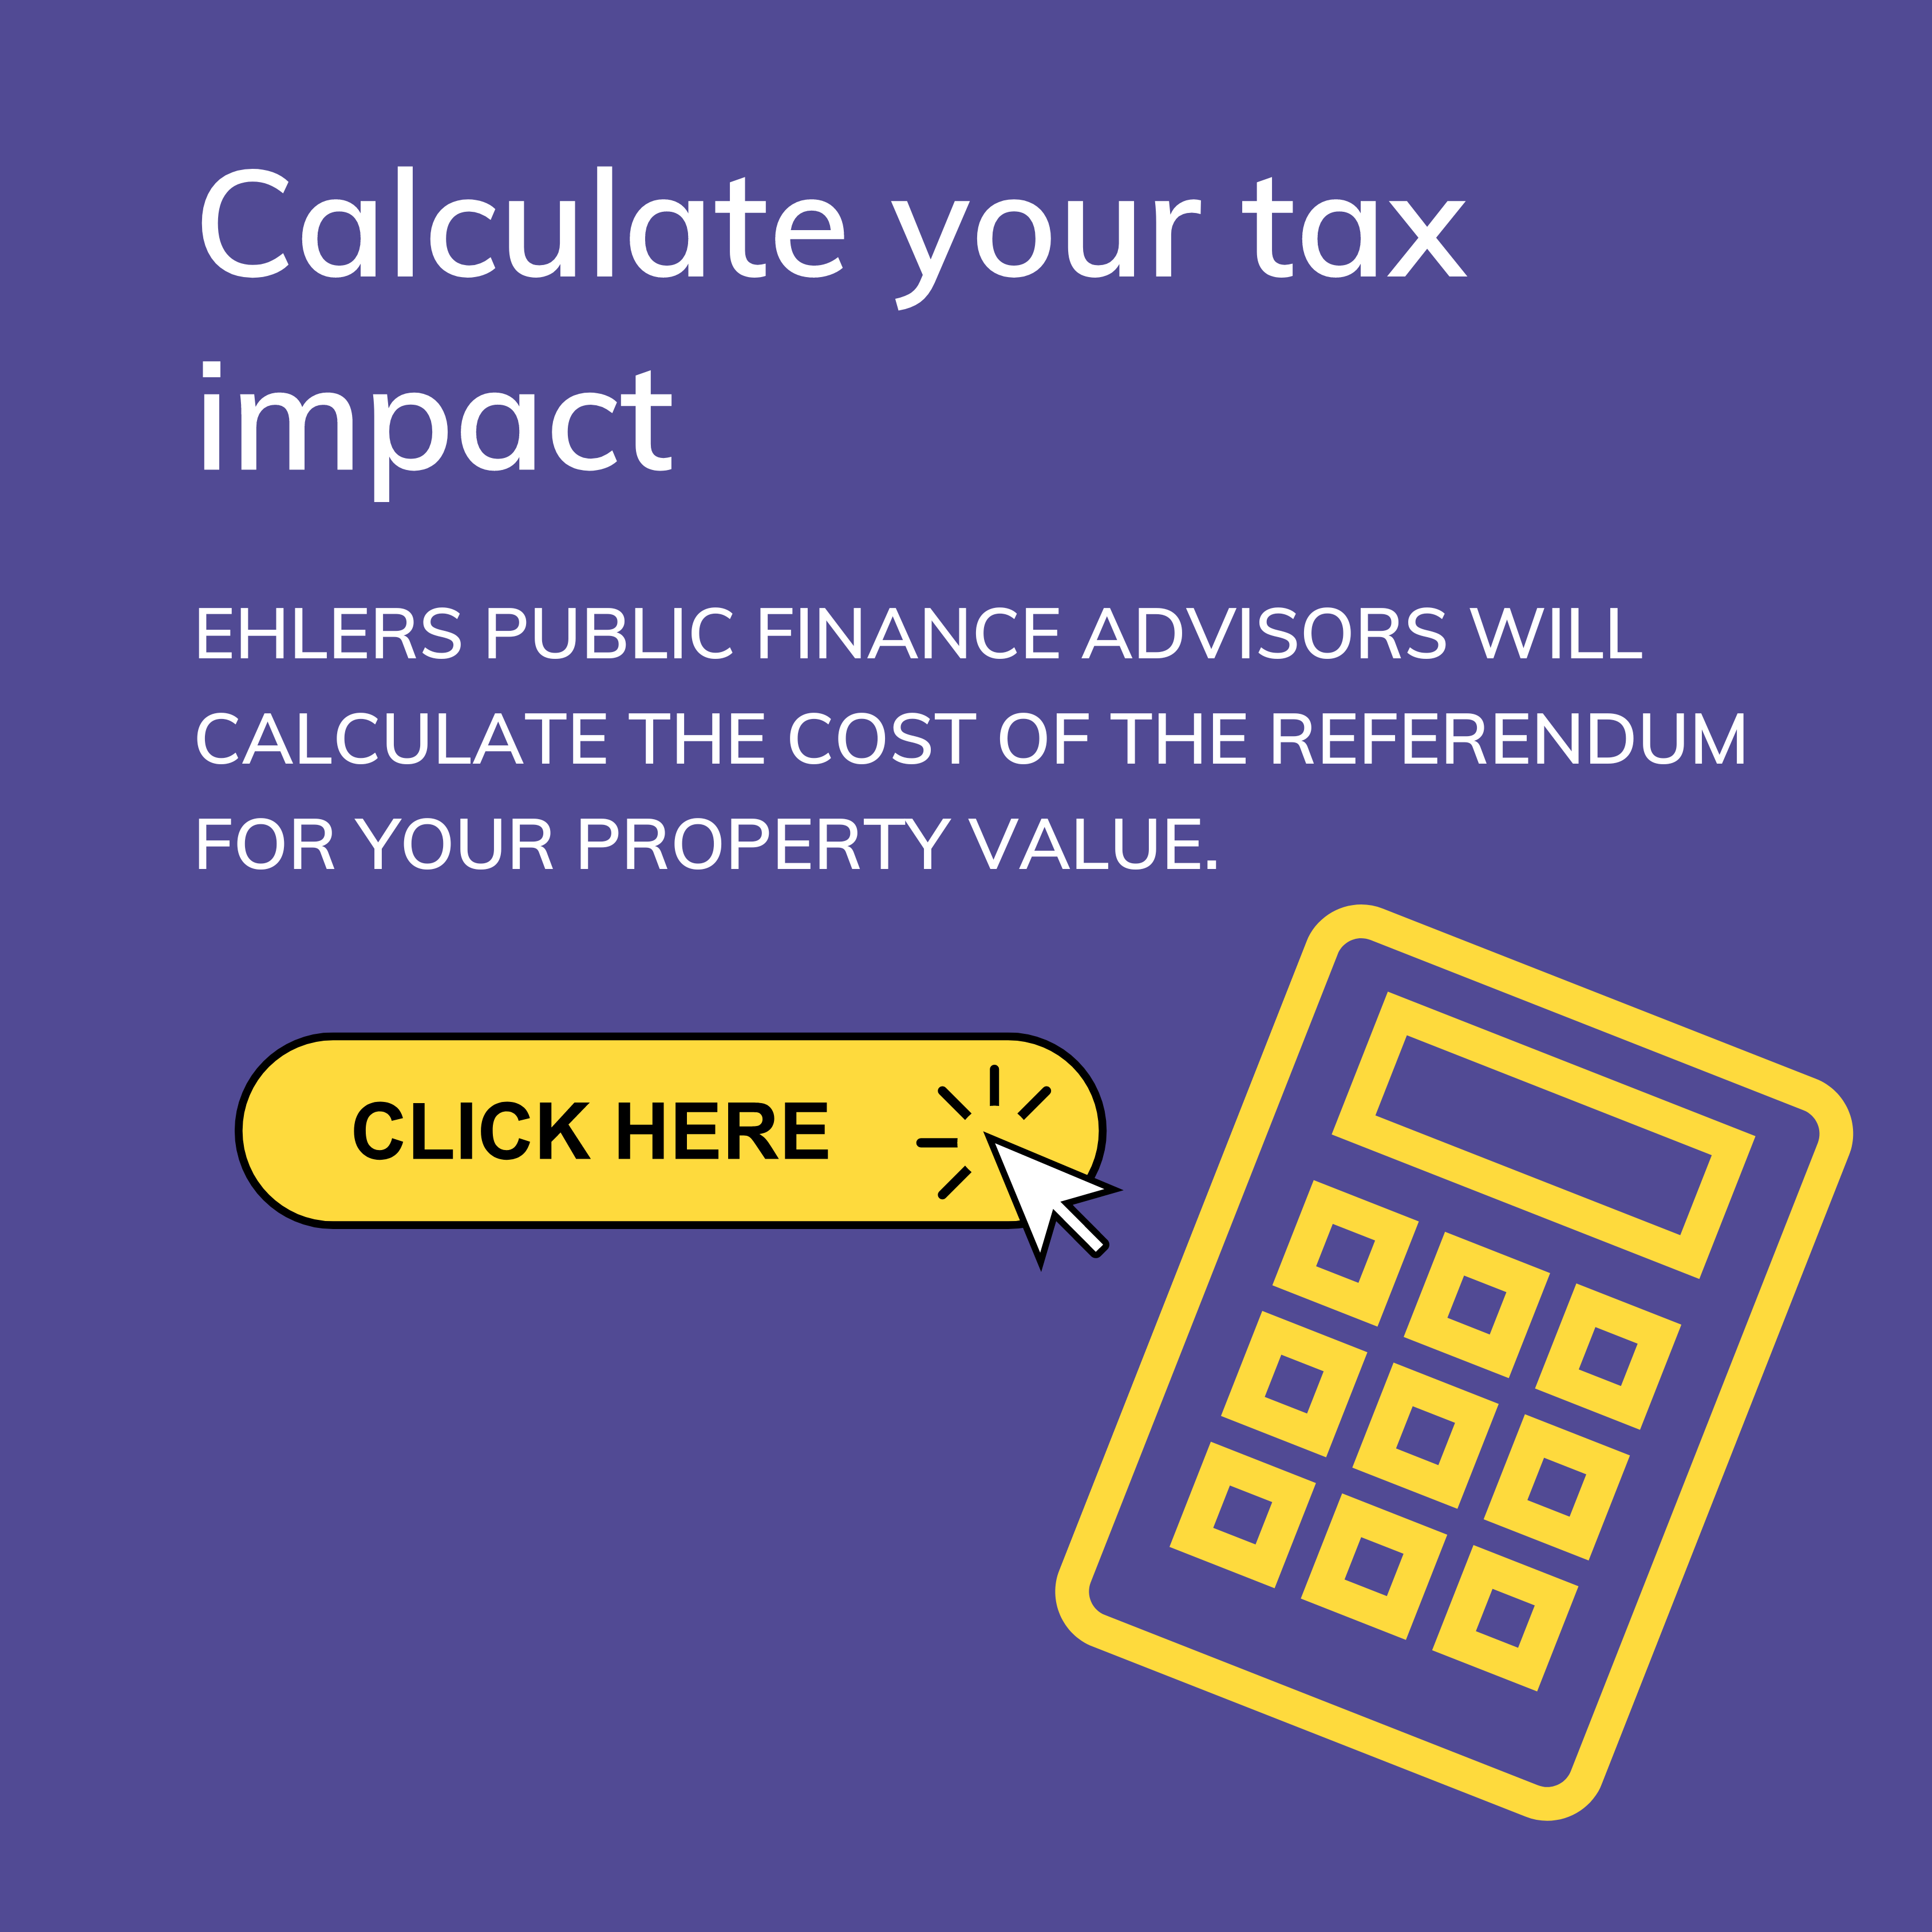 Calculate your tax impact